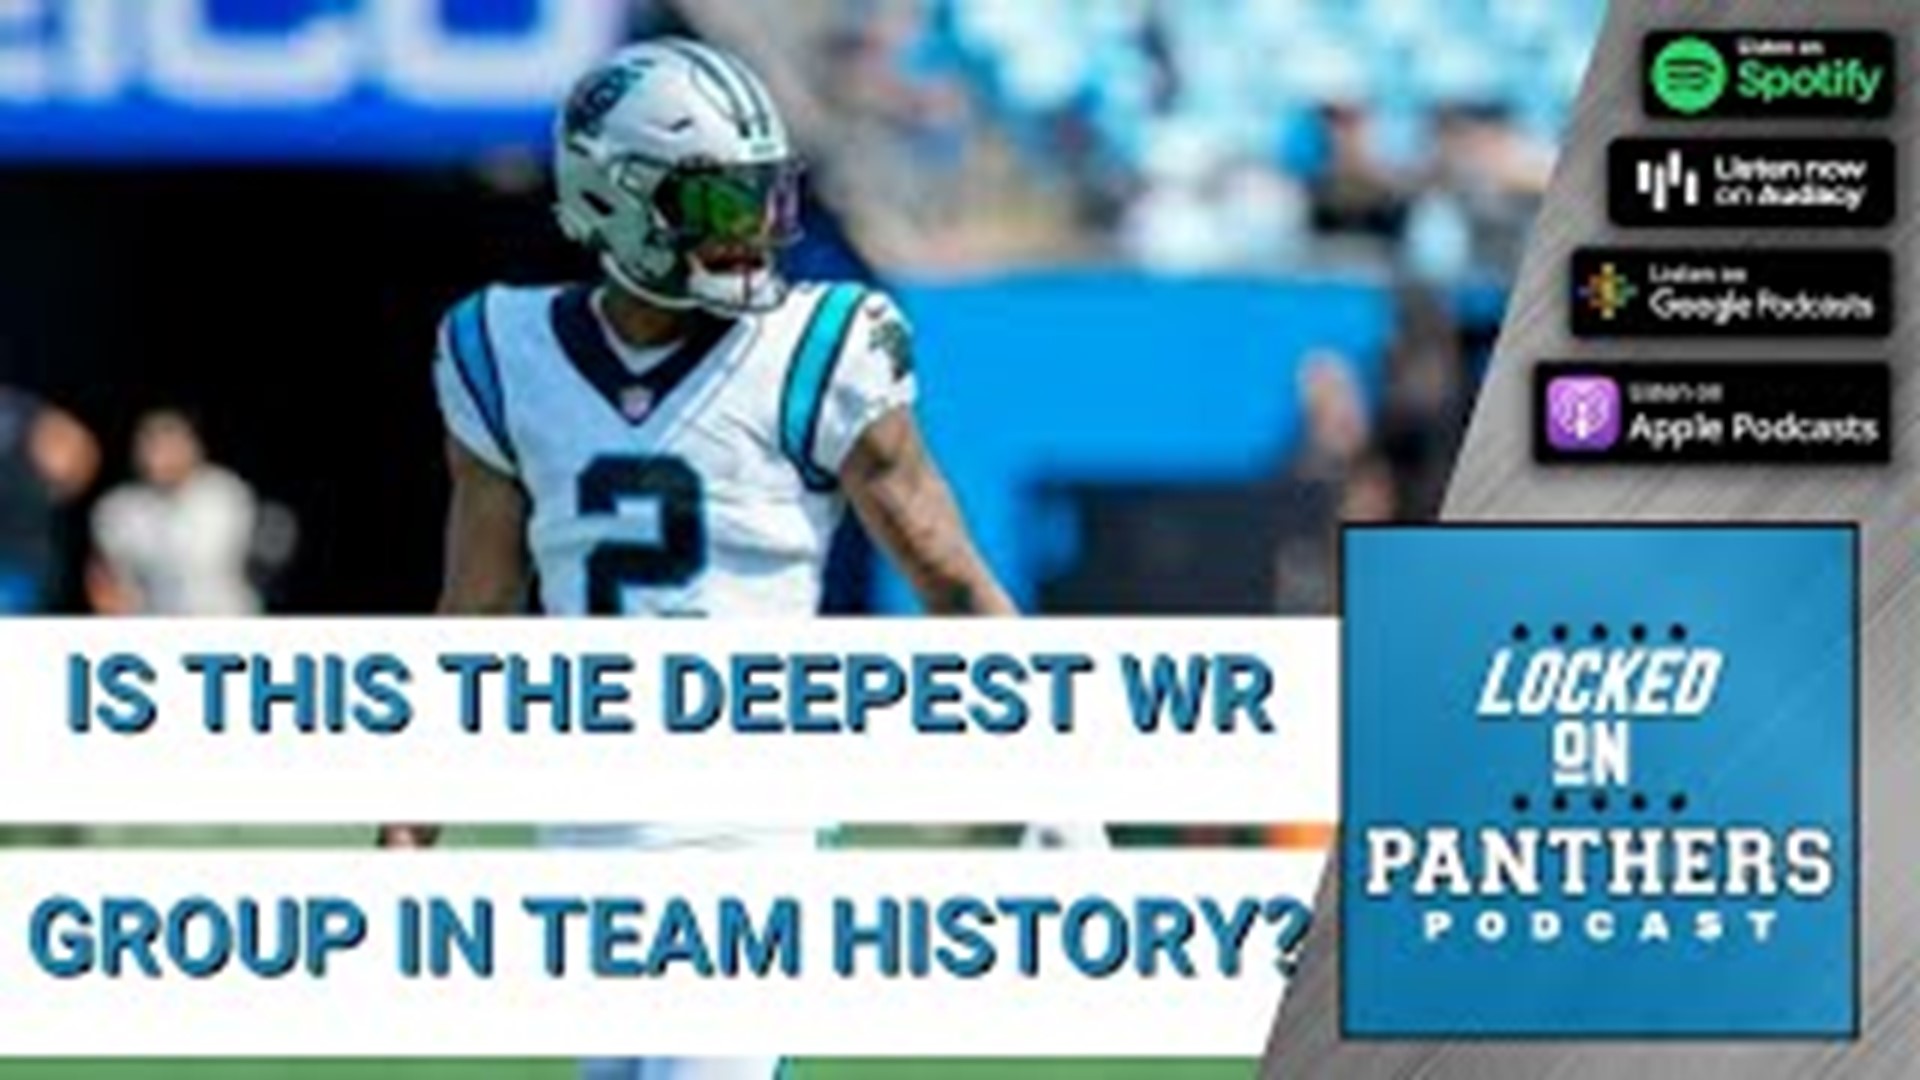 Julian Council is answering listener questions this week! Plus, The Panthers are down to 53 men on their roster as Week 1 of the NFL season is around the corner.